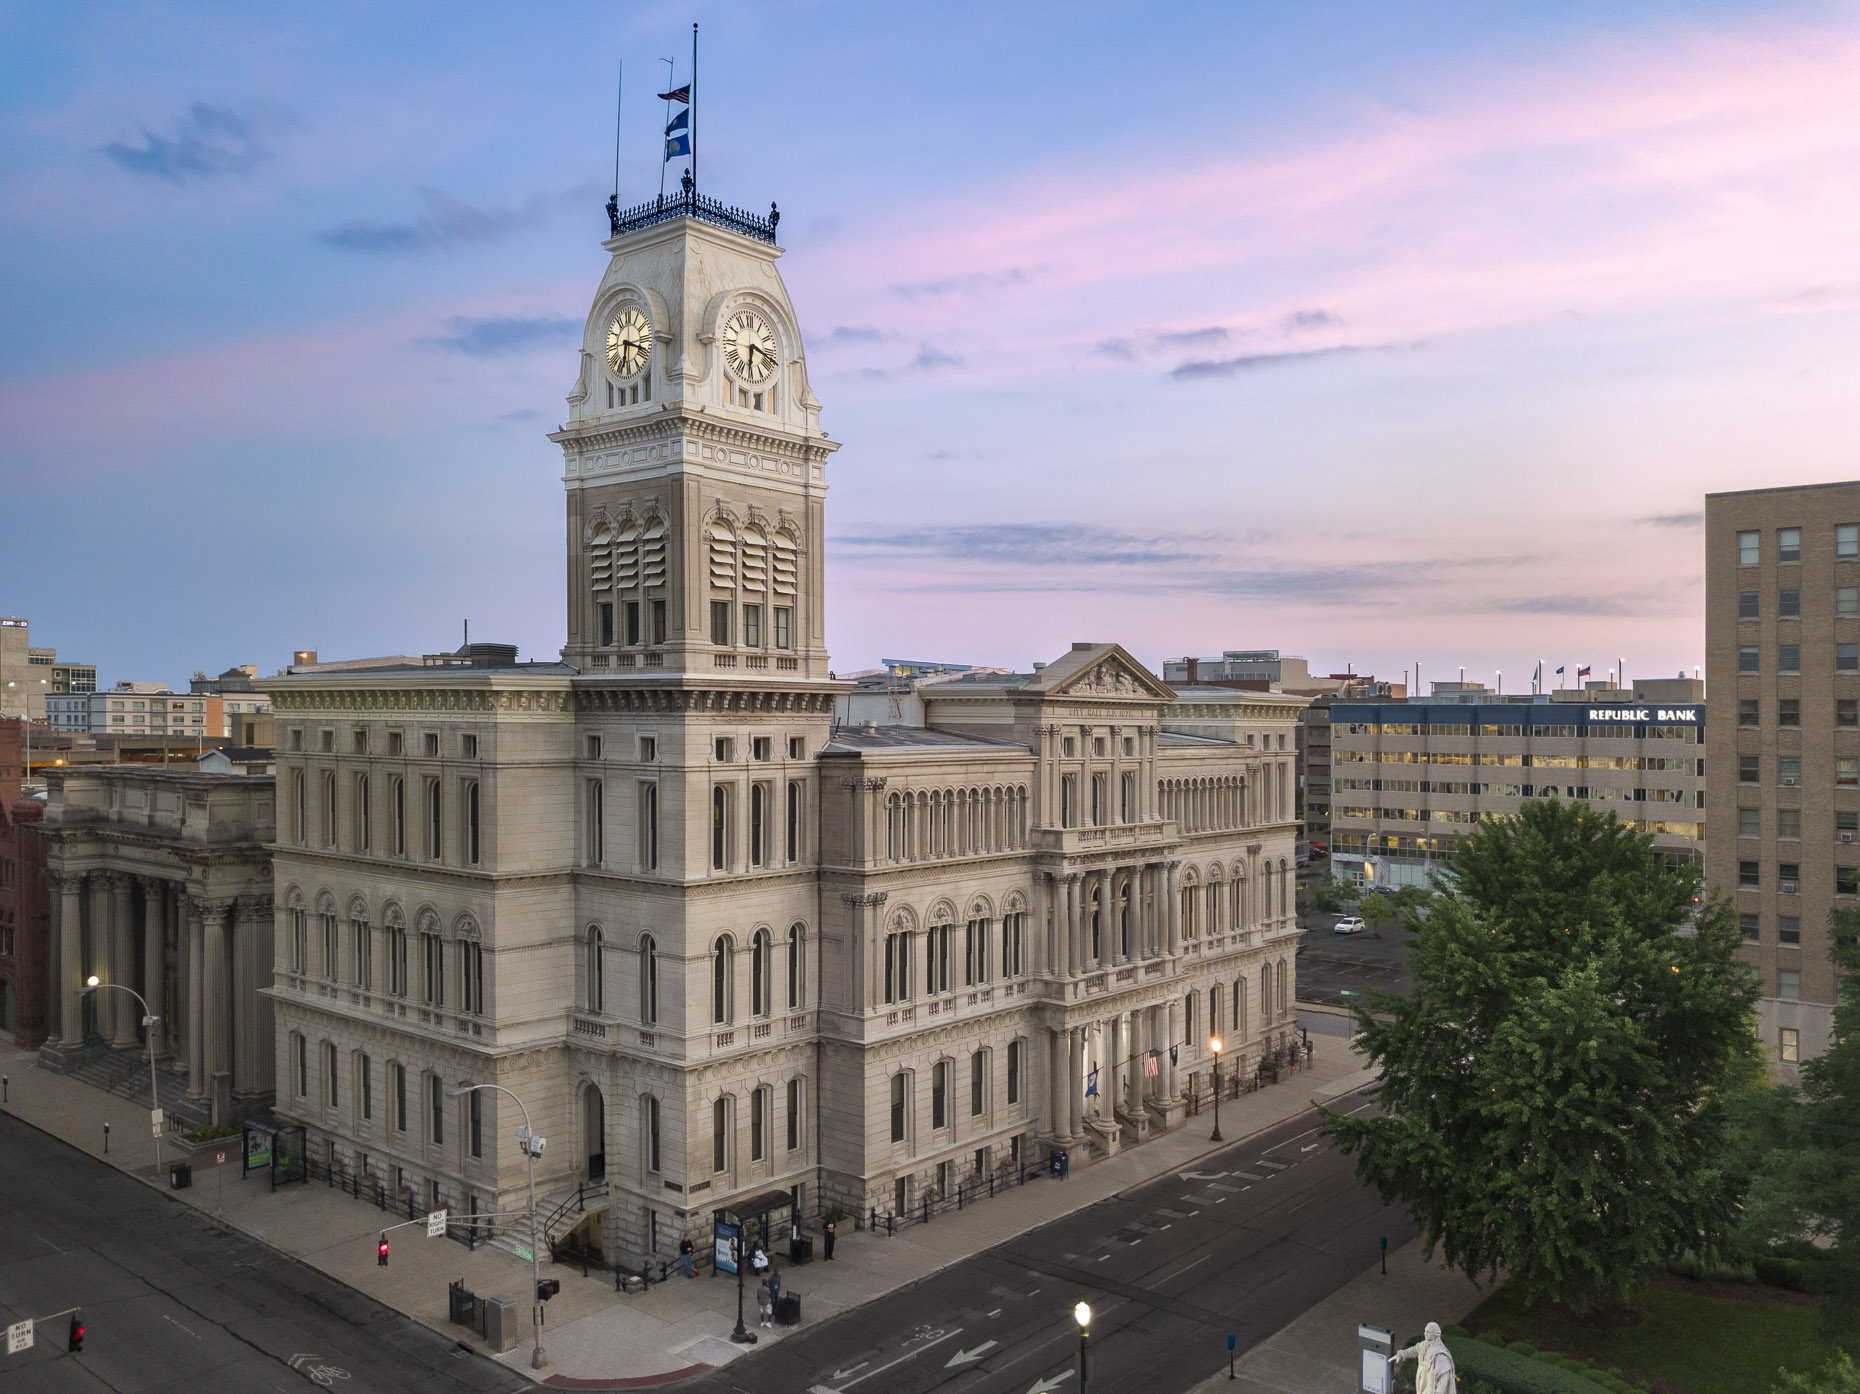 Louisville City Hall Renovation by Lord Aeck Sargent photographed by Brad Feinknopf based in Columbus, Ohio